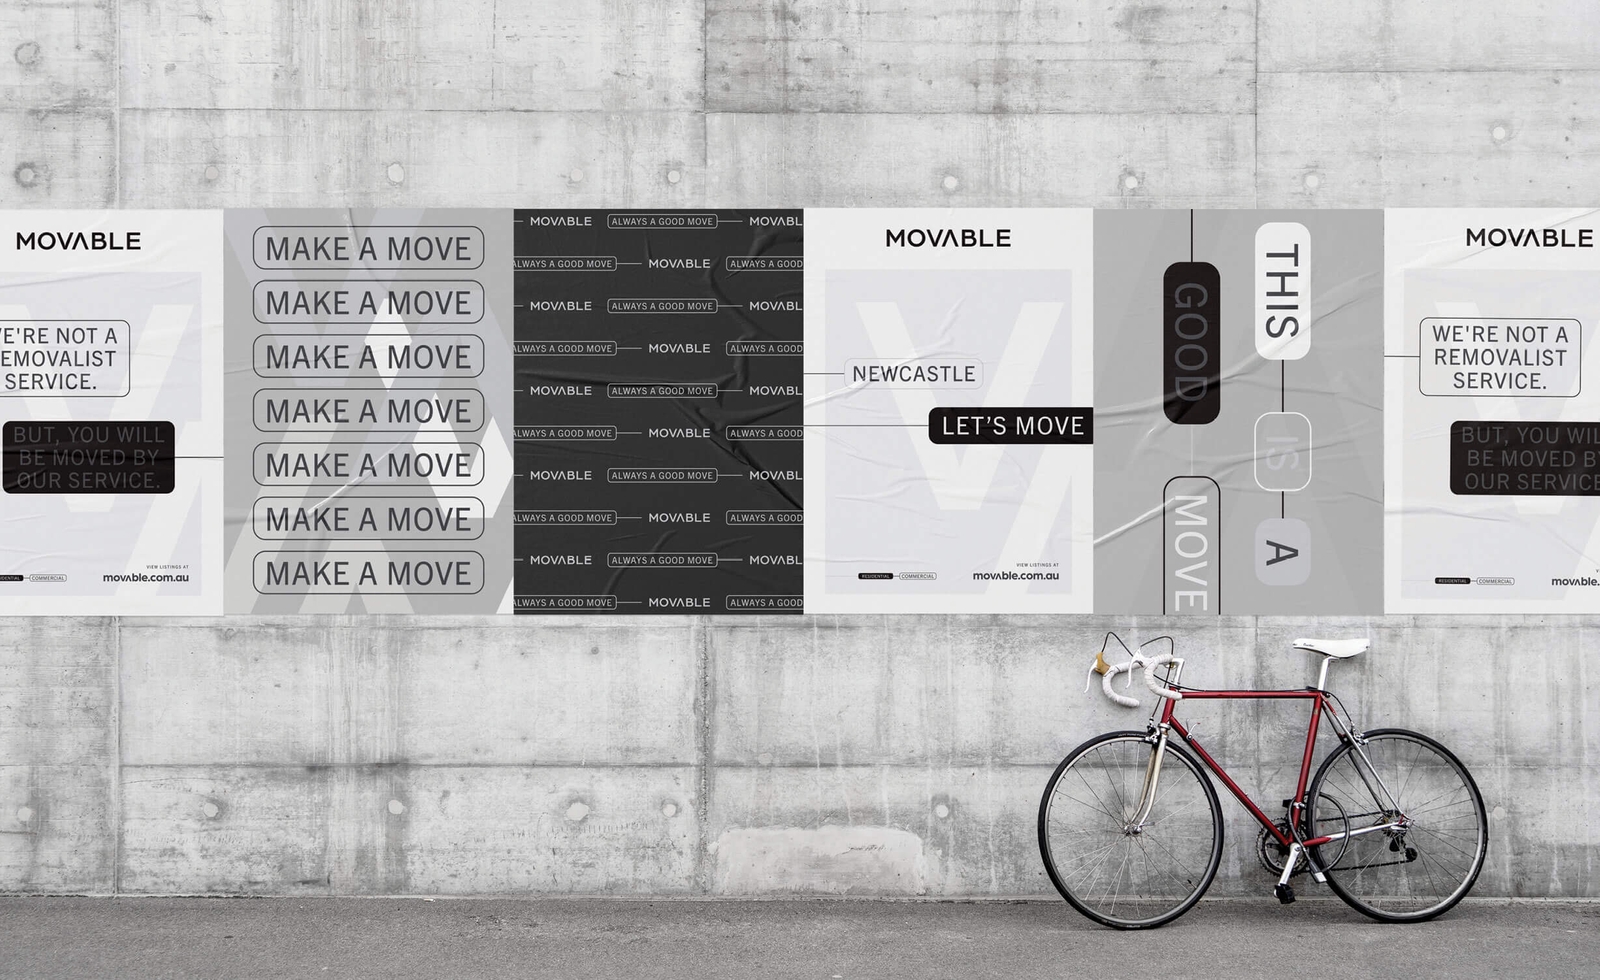 Movable - Brand and Website - Real Estate Street Poster Design | Atollon - a design company